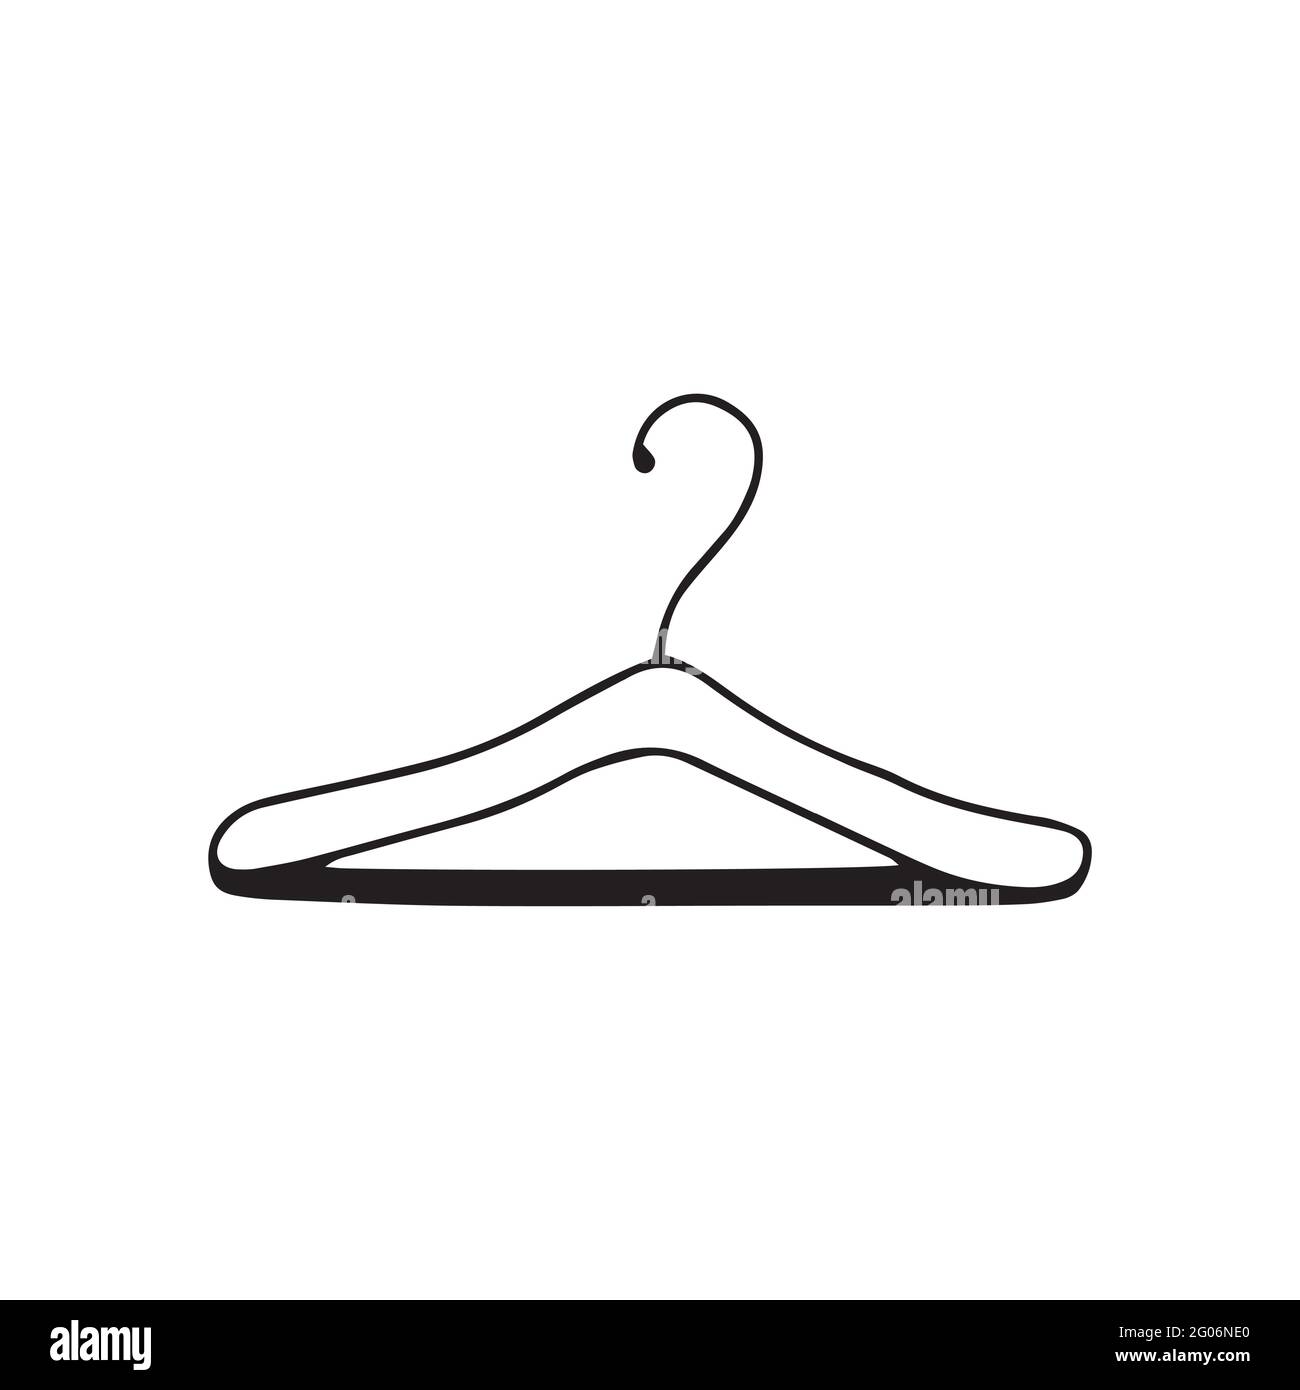 https://c8.alamy.com/comp/2G06NE0/clothes-rack-black-and-white-vector-illustration-in-doodle-style-isolated-single-tool-for-organizing-storage-in-the-closet-hanger-empty-2G06NE0.jpg